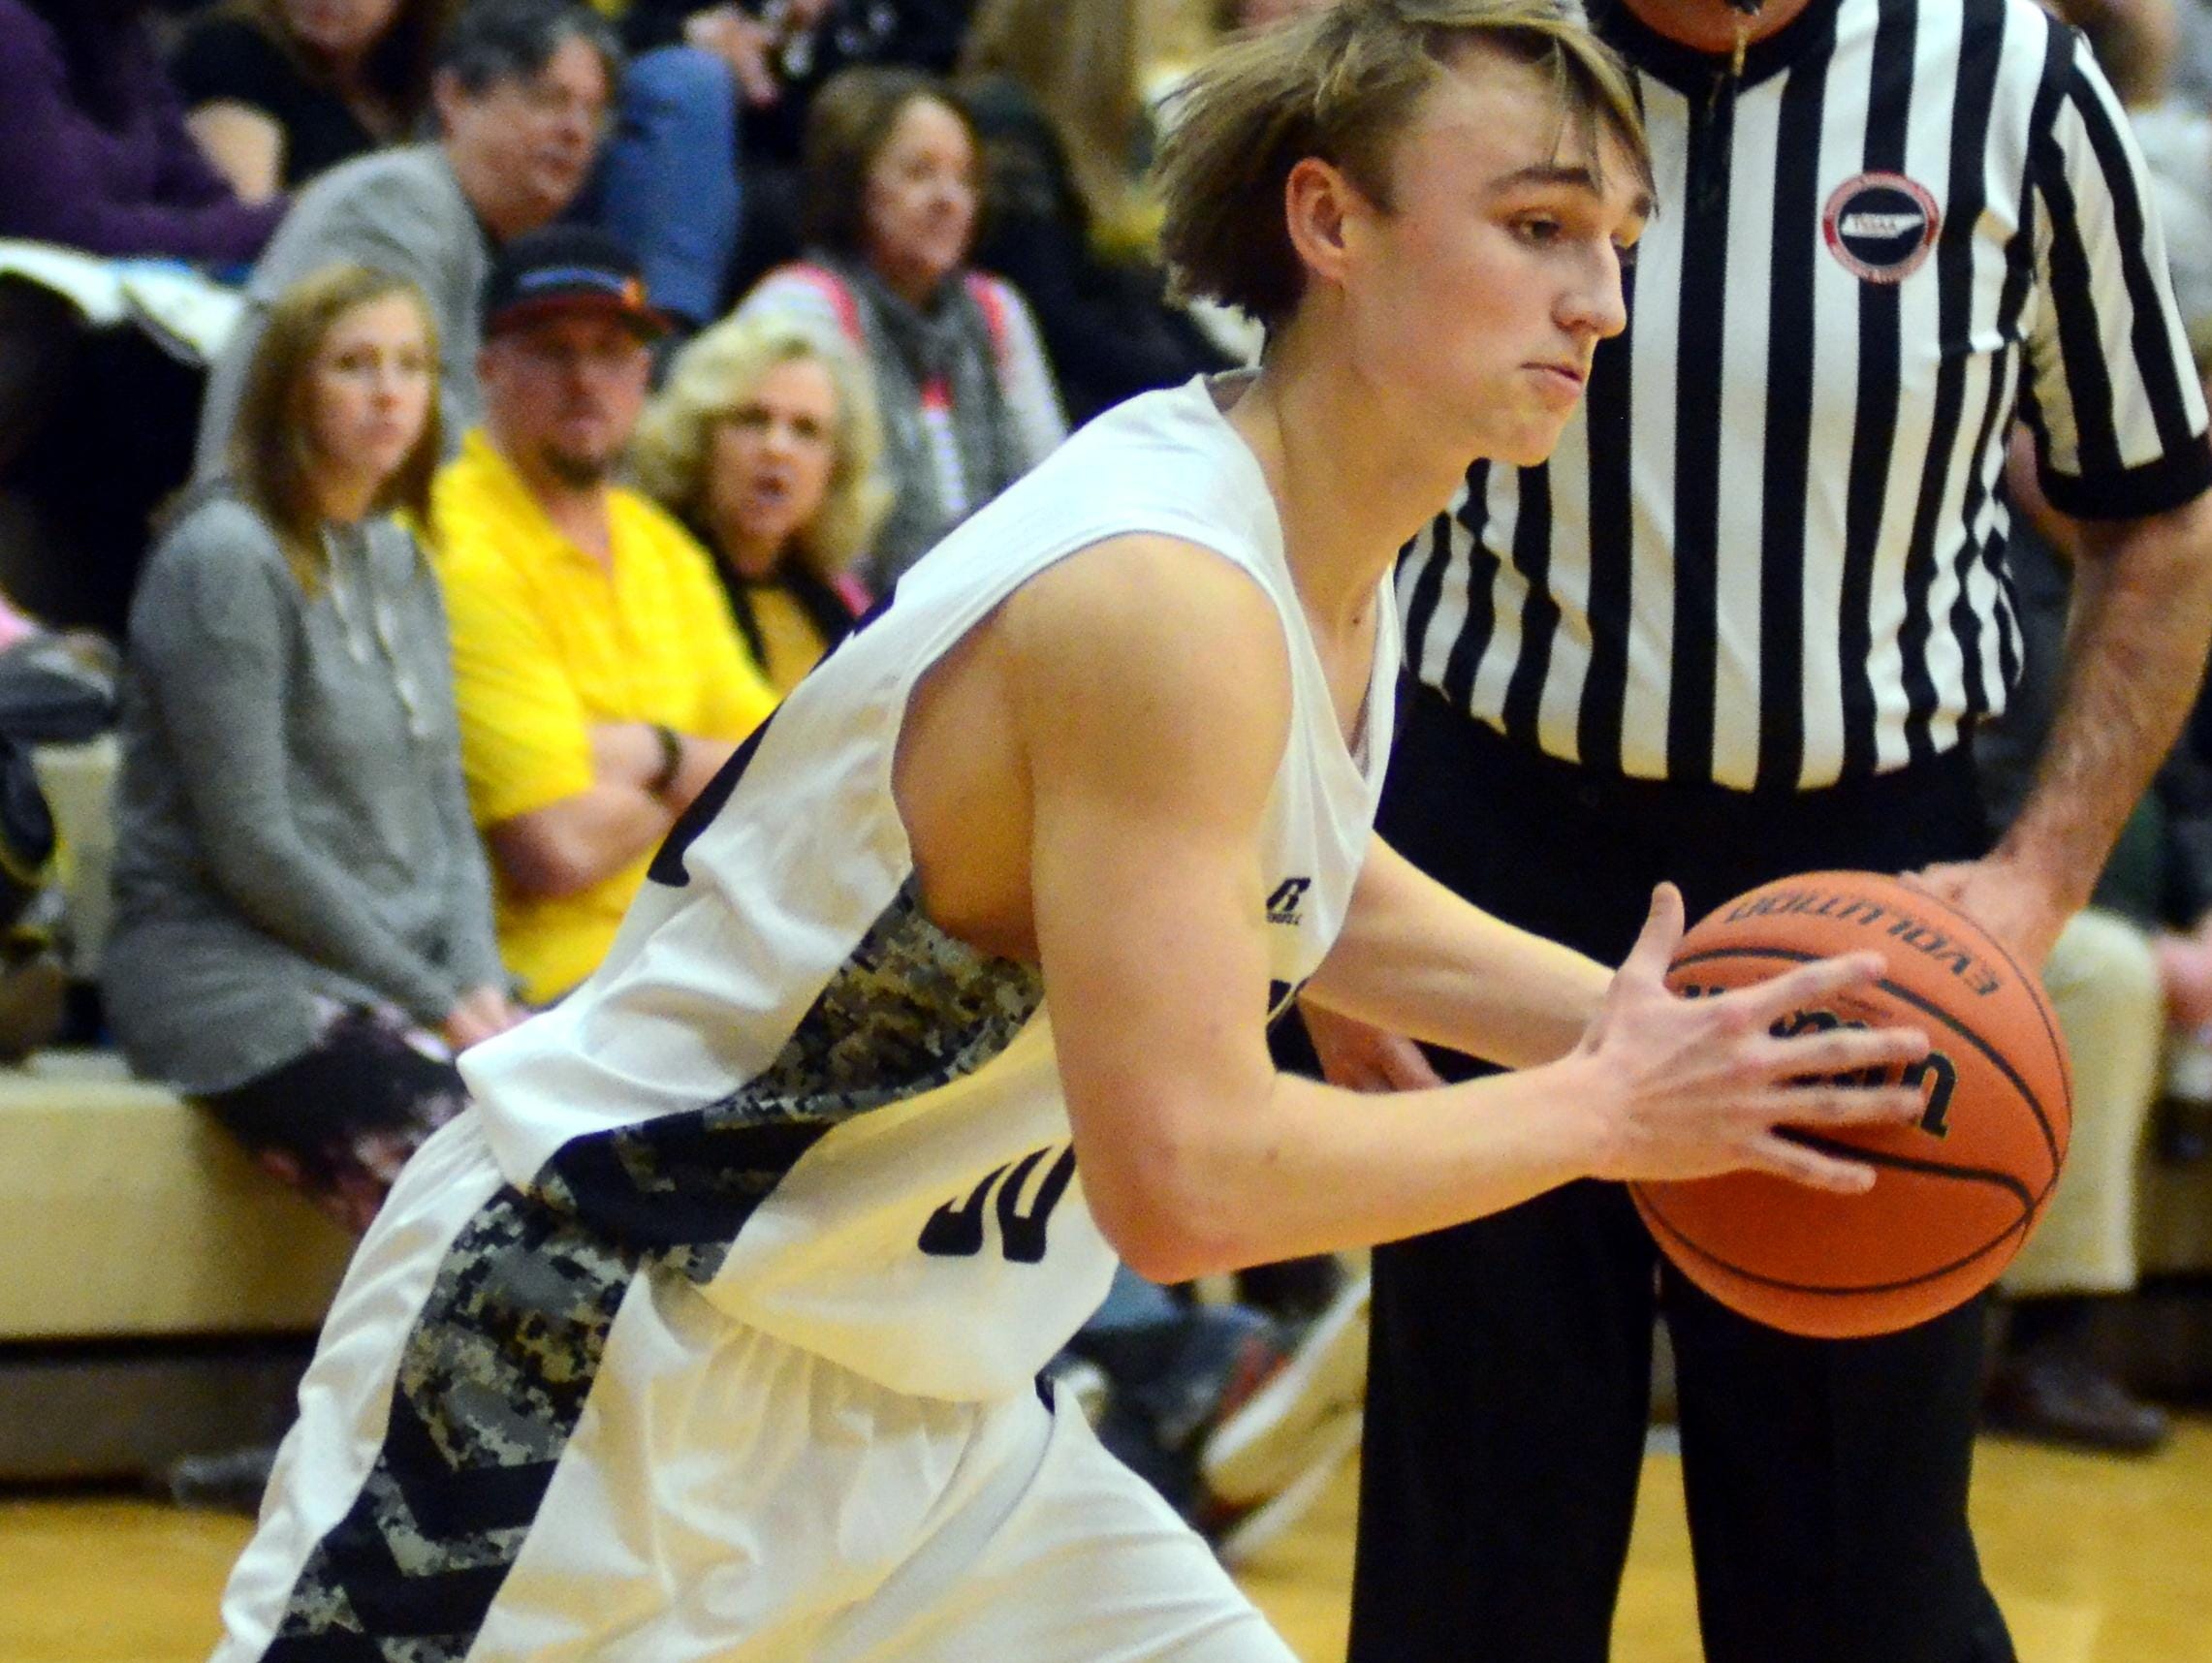 Hendersonville High junior Ryne Loper prepares to drive into the lane during second-quarter action. Loper scored three points.